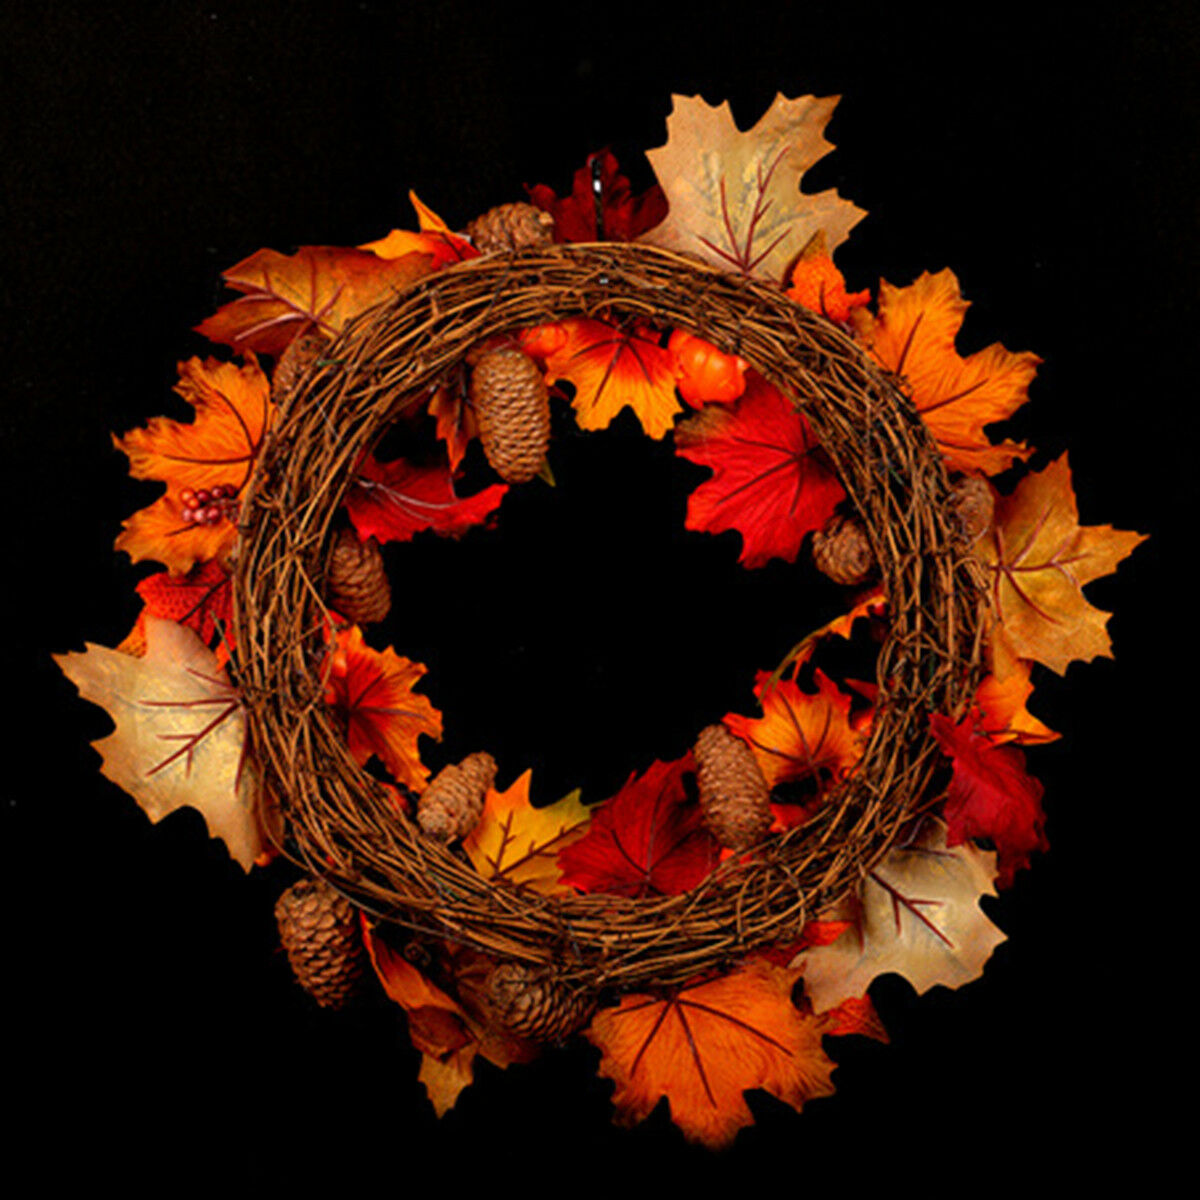 4560cm-Wreath-Garland-Maple-Leaves-Pumpkin-Door-For-Christmas-Party-Decorations-1637102-4